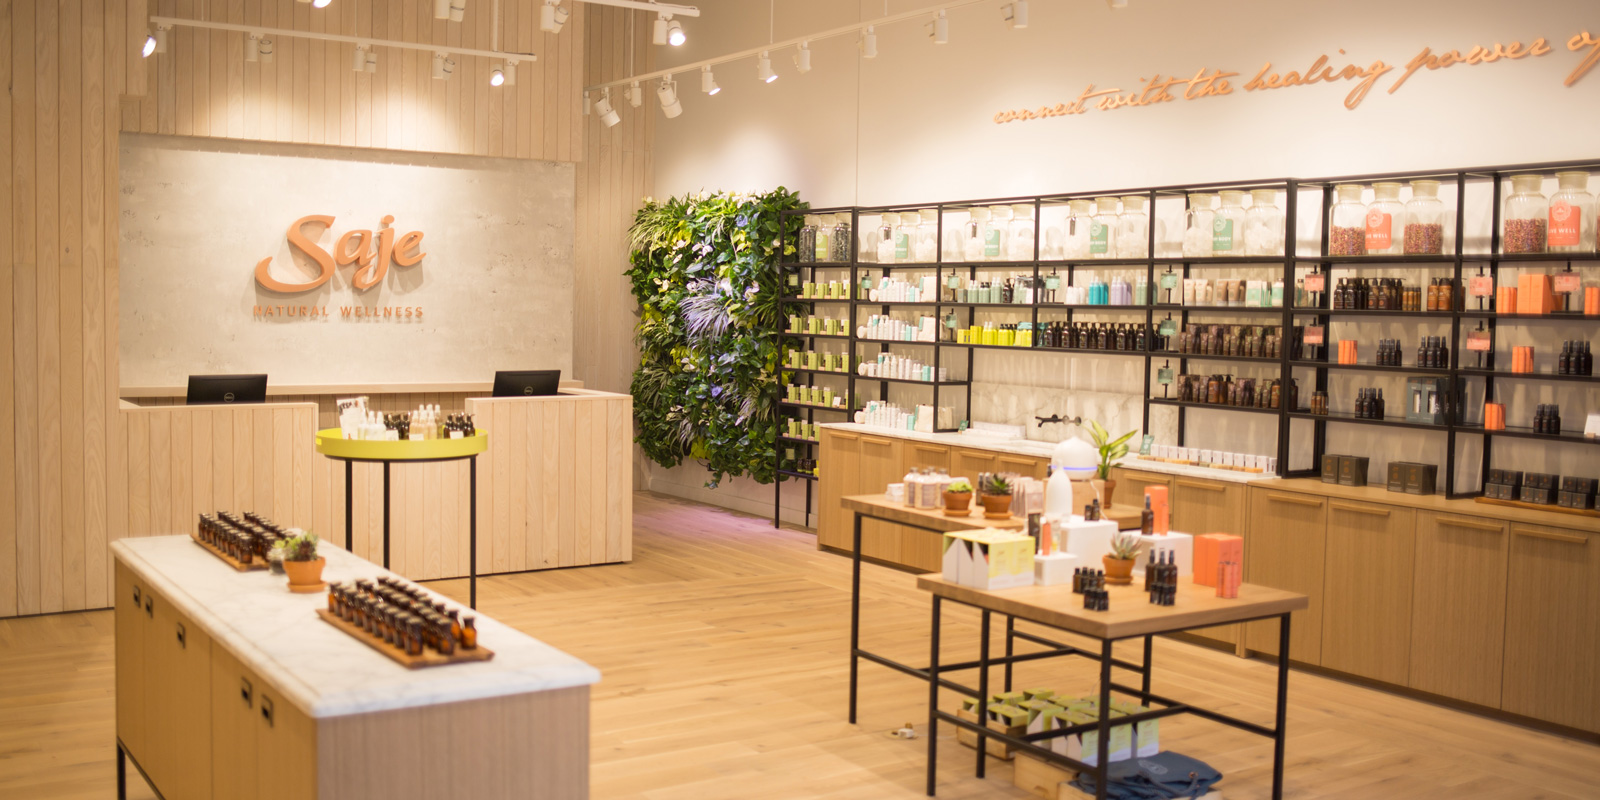 Saje Natural Wellness to open first Orange County store at Fashion Island